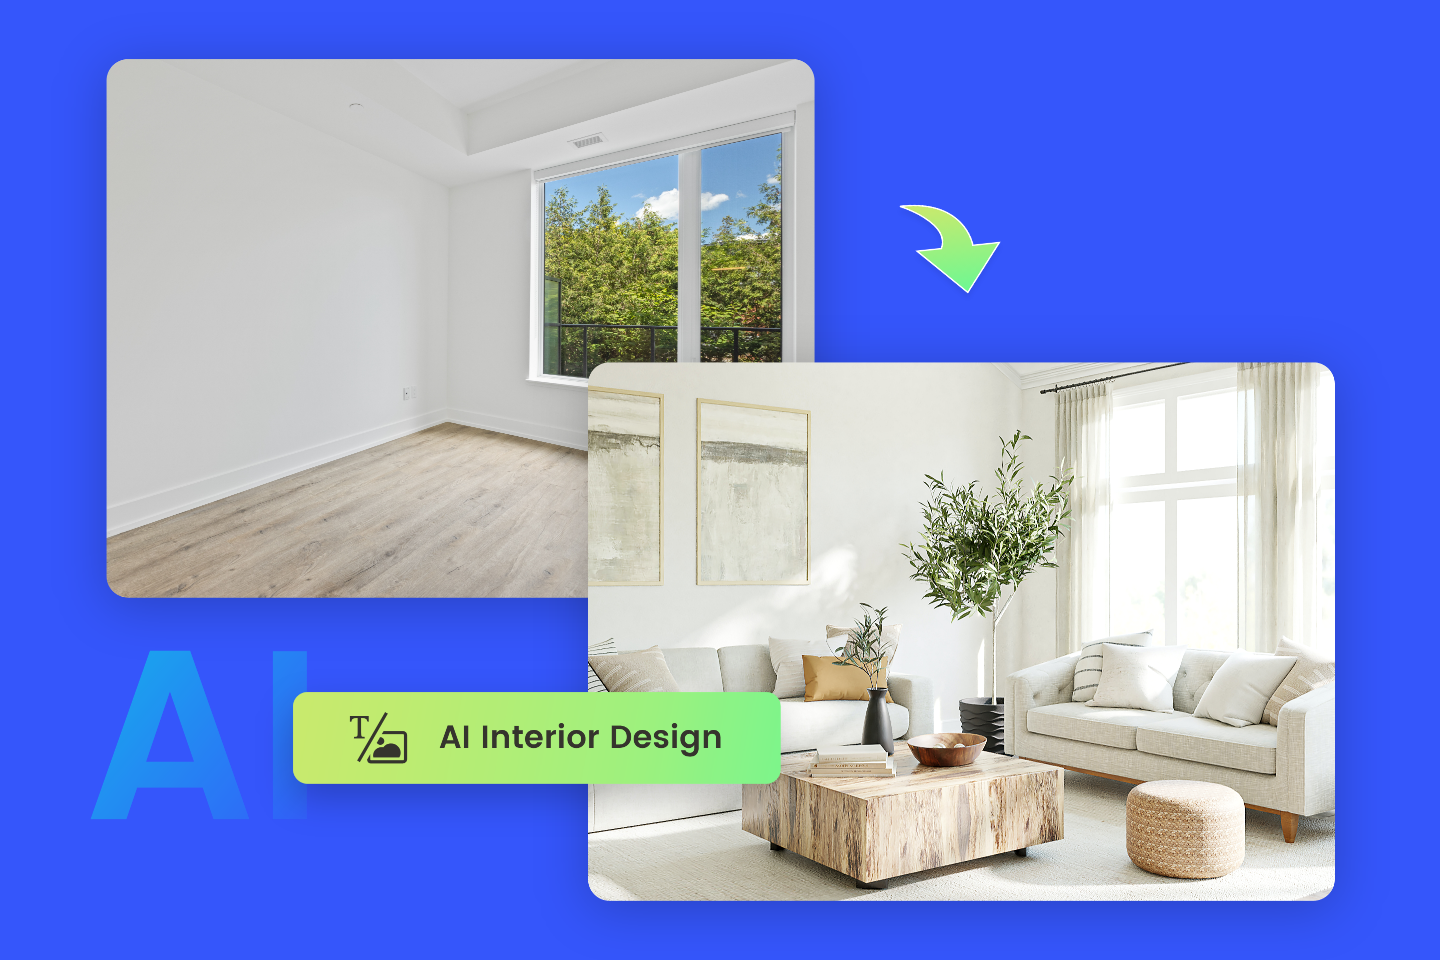 Use fotor ai interior deisgn tool to redesign the living room